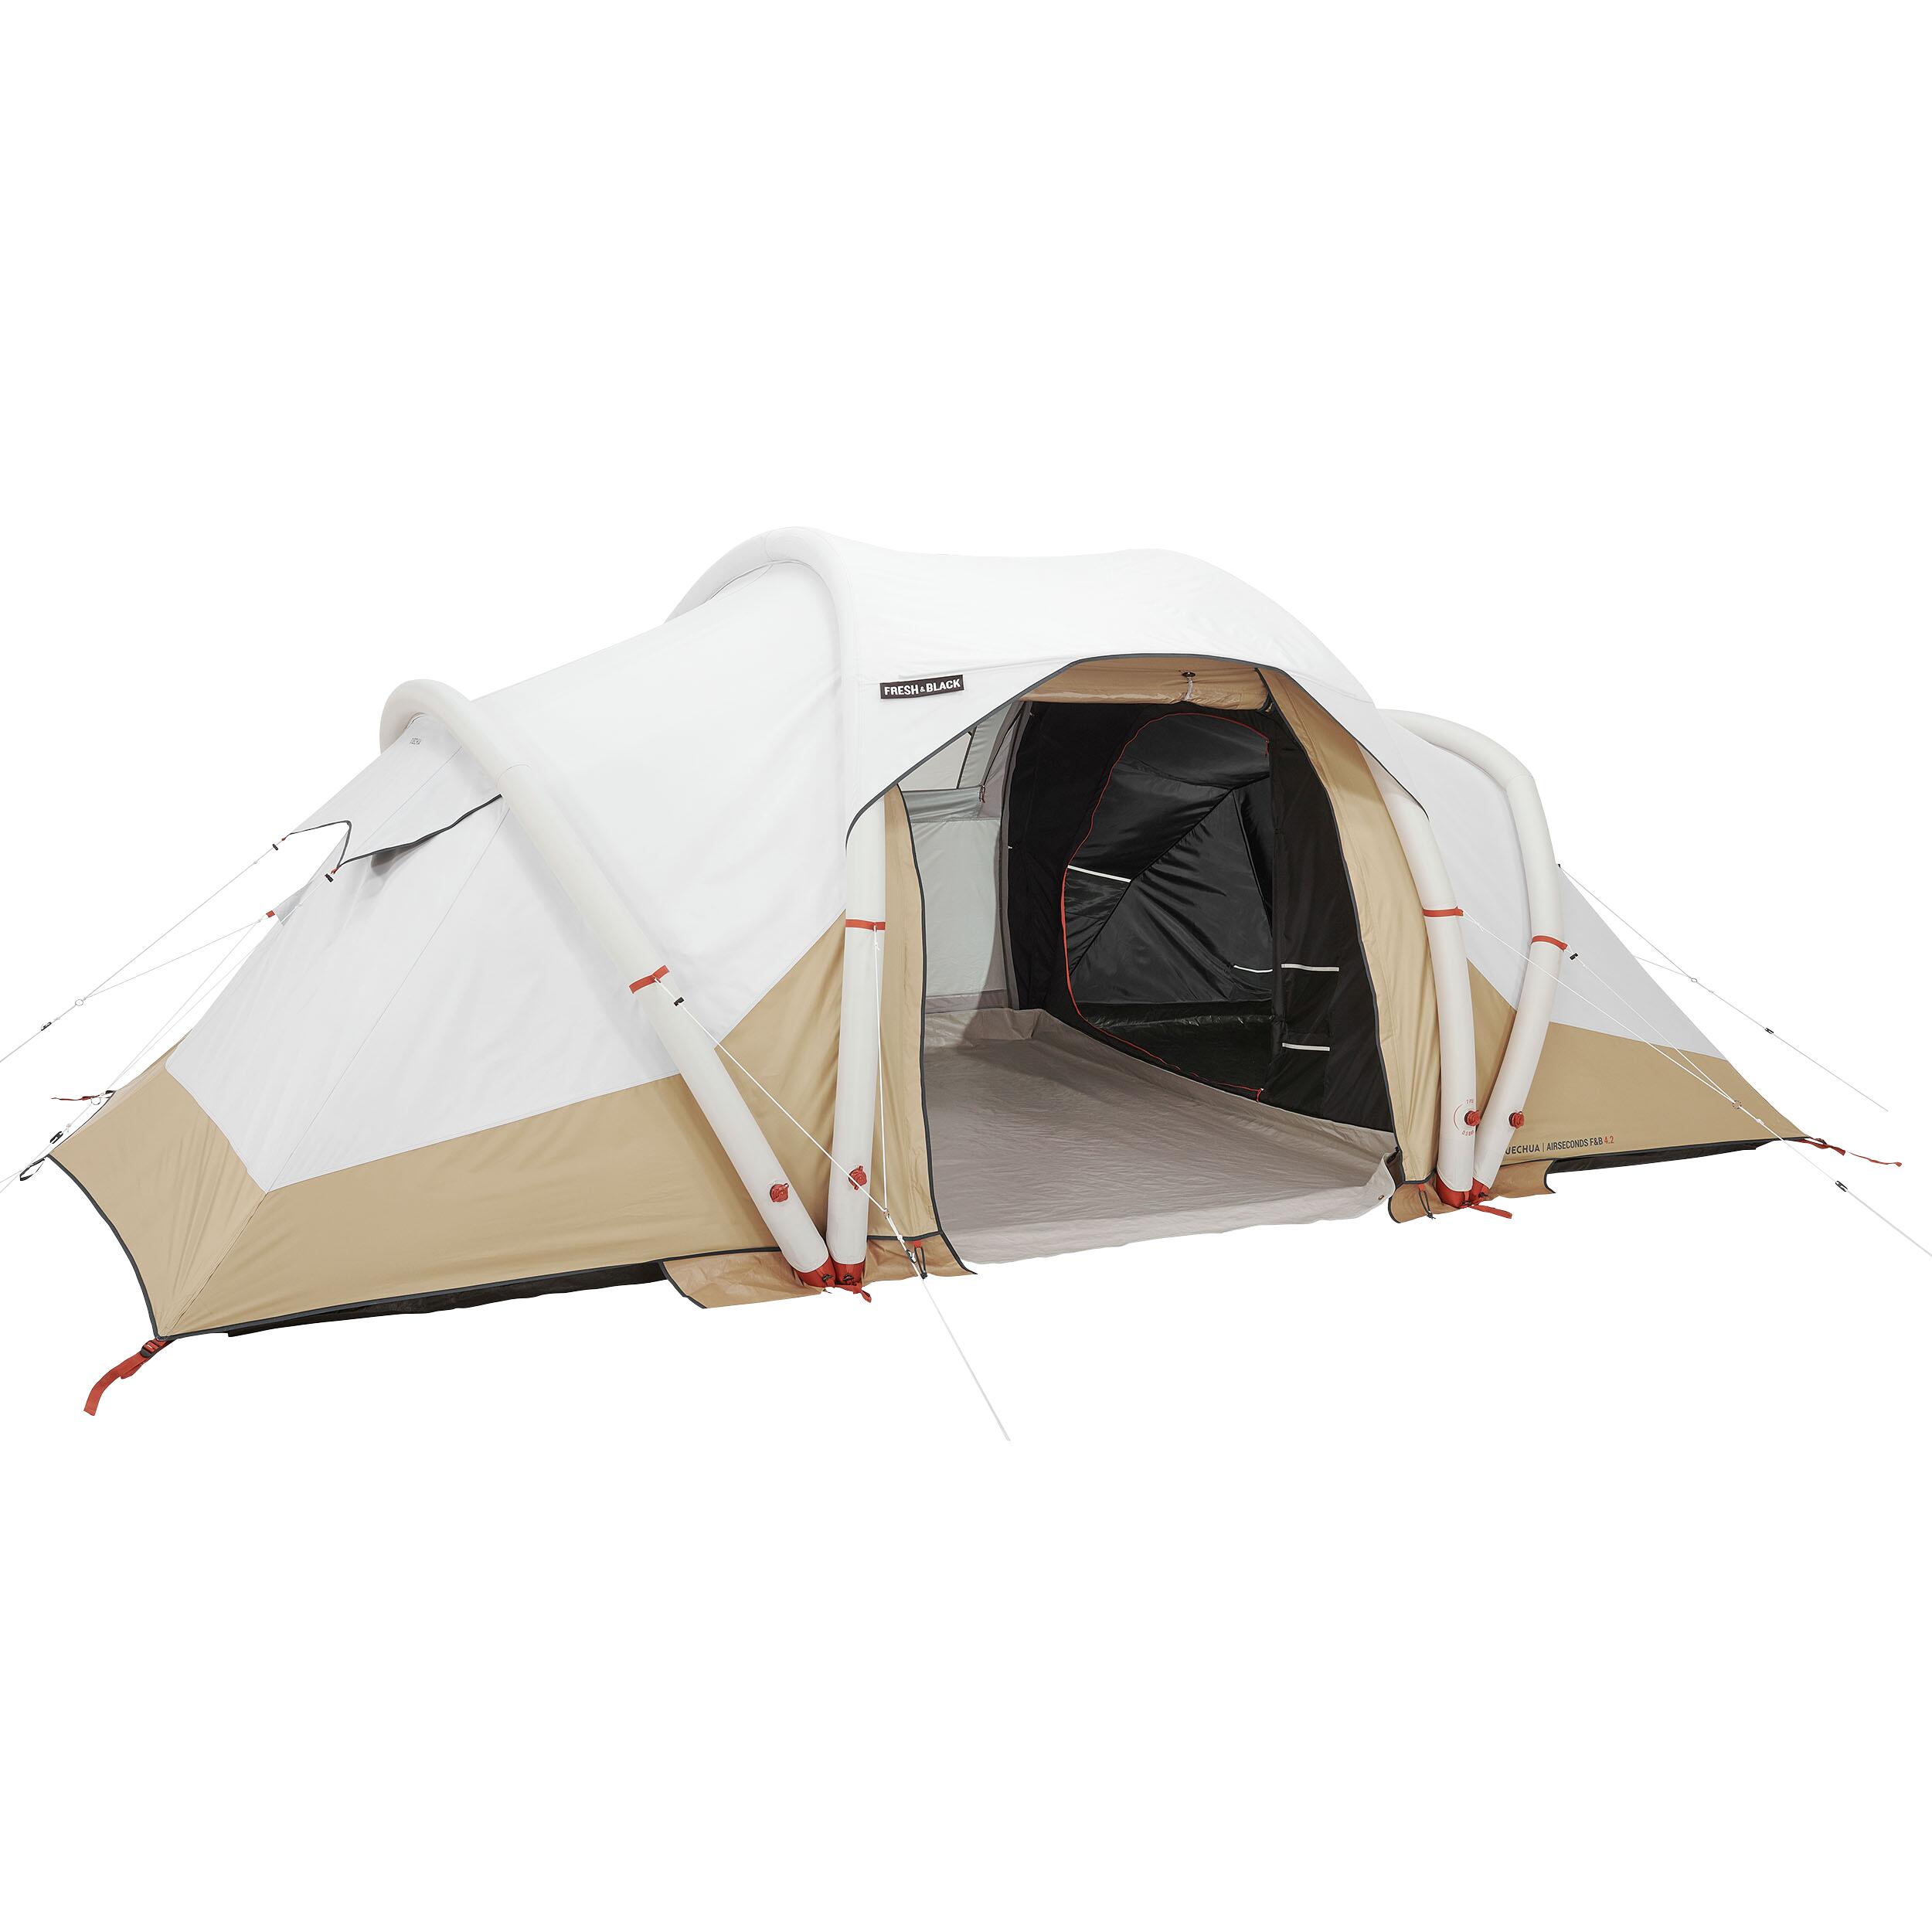 Inflatable camping tent - Air Seconds 4.2 F&B - 4 Person - 2 Bedroom 25/77